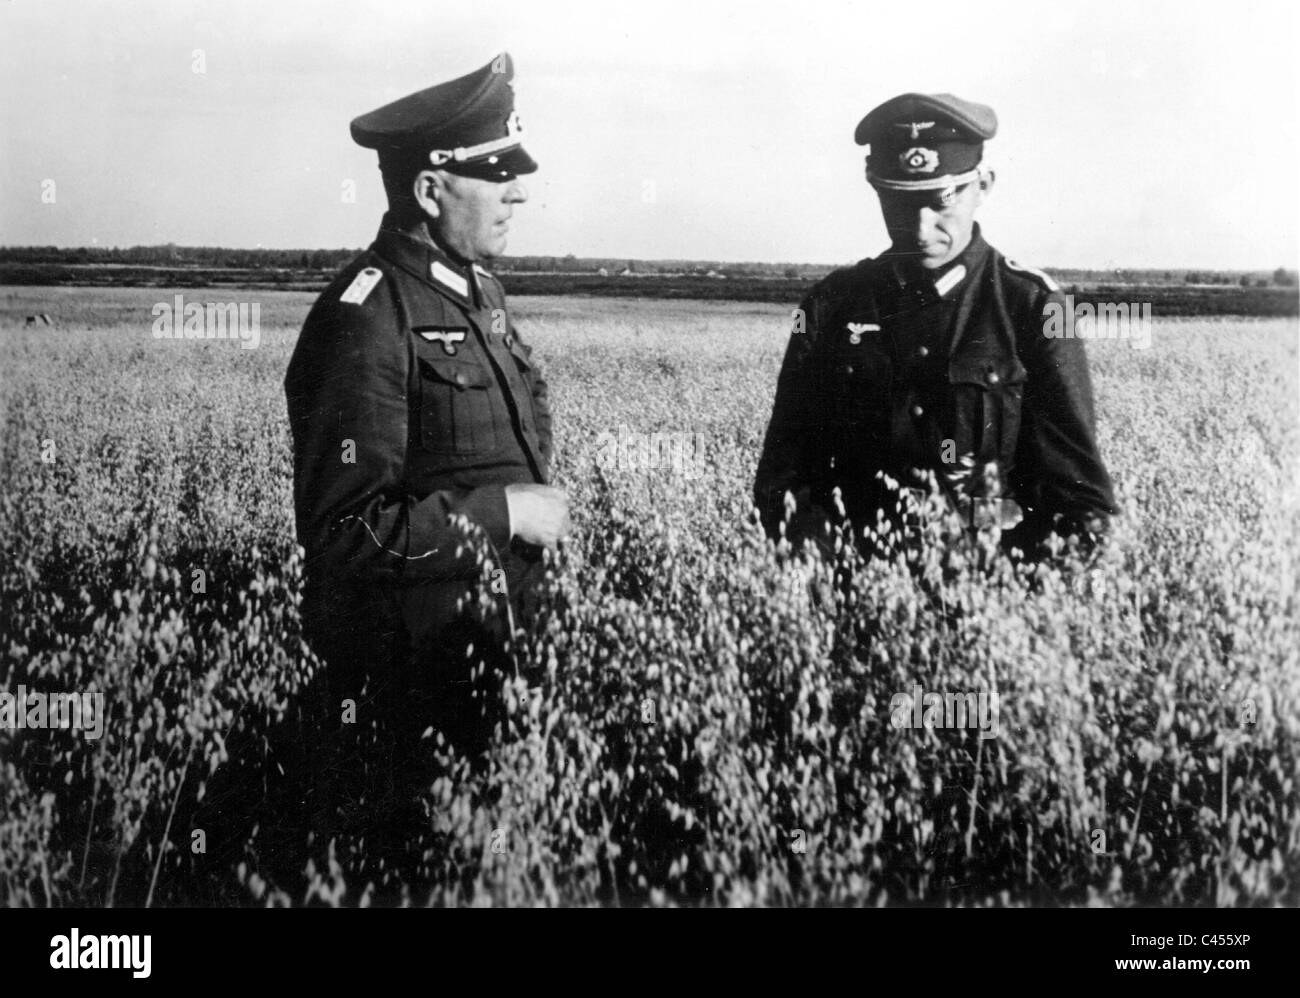 German Agricultural Leaders oversee the harvest, 1942 Stock Photo